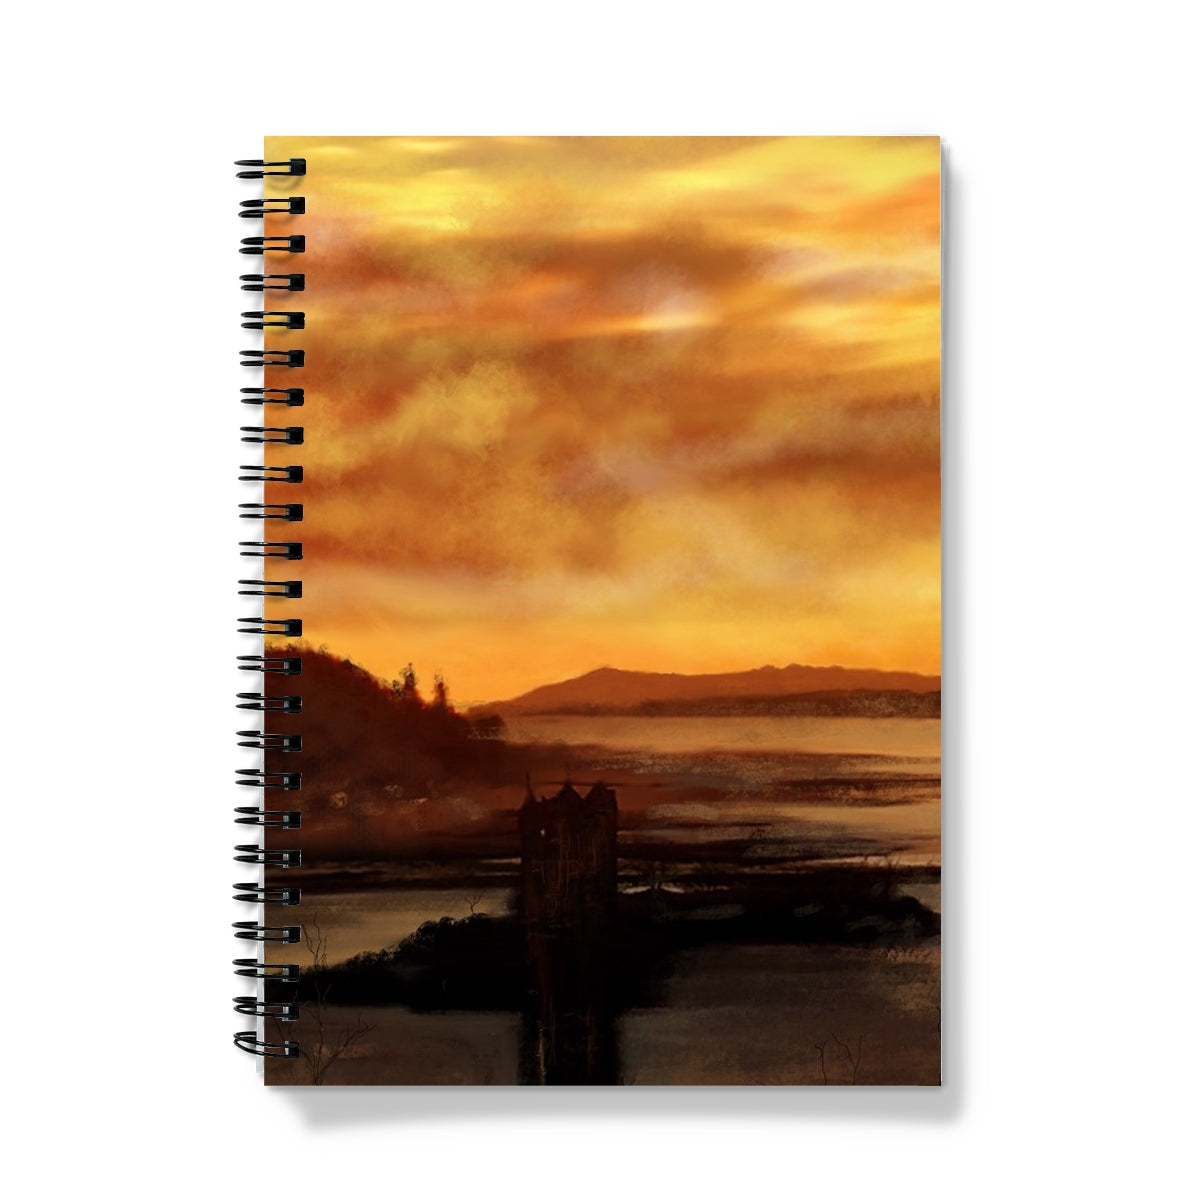 Castle Stalker Dusk Art Gifts Notebook-Journals & Notebooks-Historic & Iconic Scotland Art Gallery-A5-Graph-Paintings, Prints, Homeware, Art Gifts From Scotland By Scottish Artist Kevin Hunter